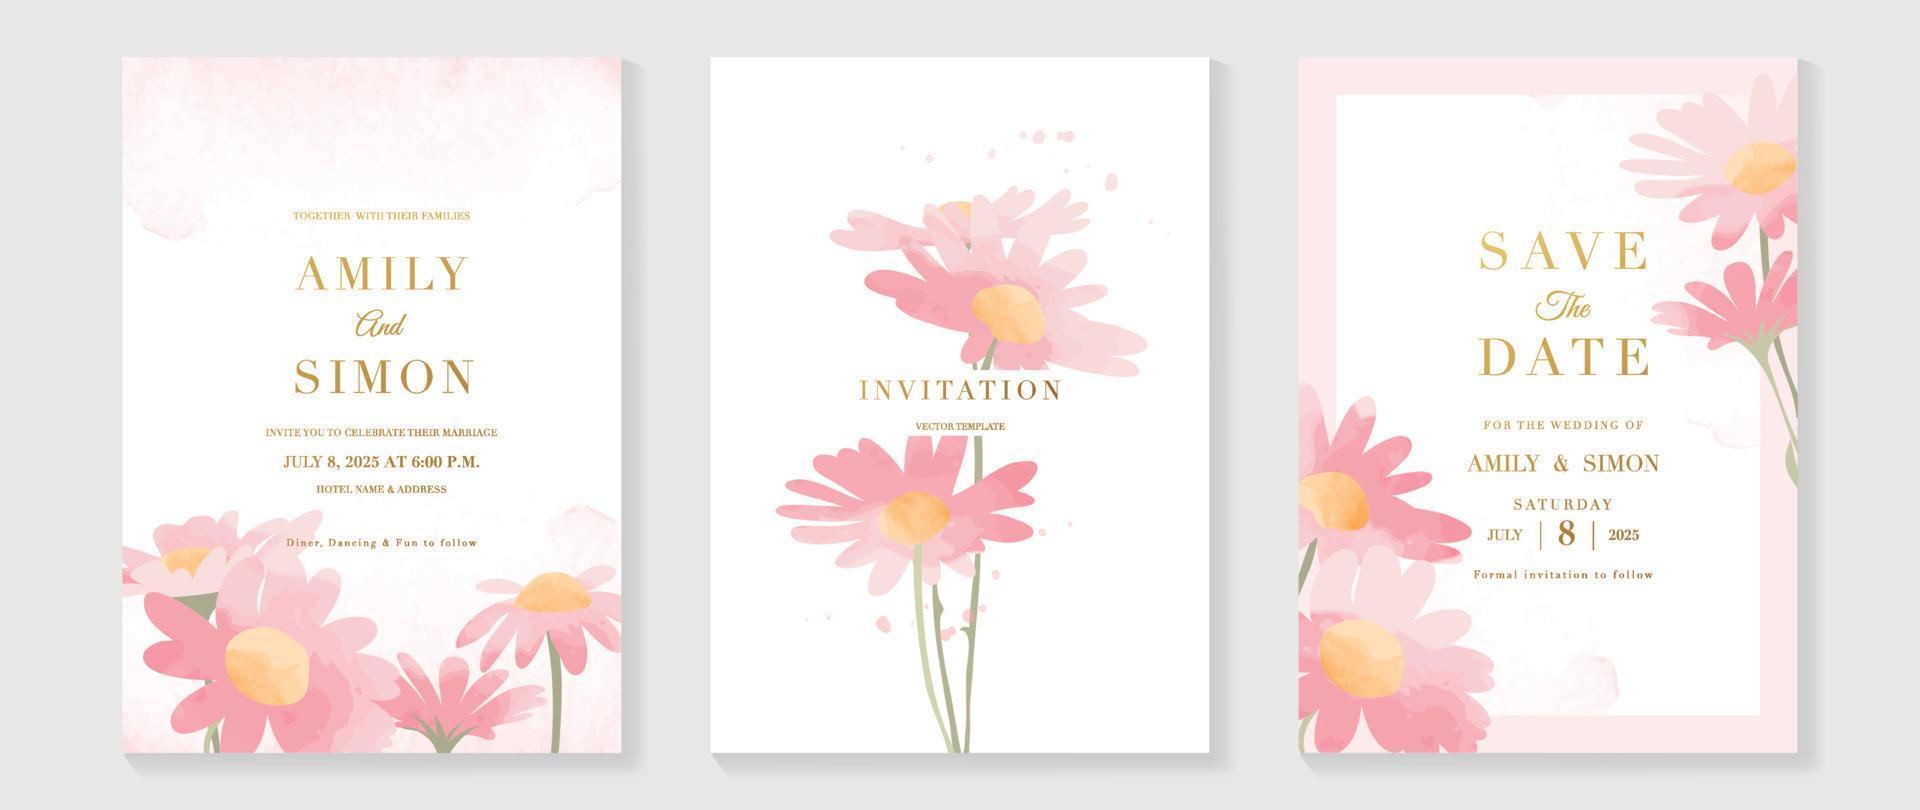 Luxury wedding invitation card background vector. Elegant hand drawn watercolor botanical wildflowers texture template background. Design illustration for wedding and vip cover template, banner. vector